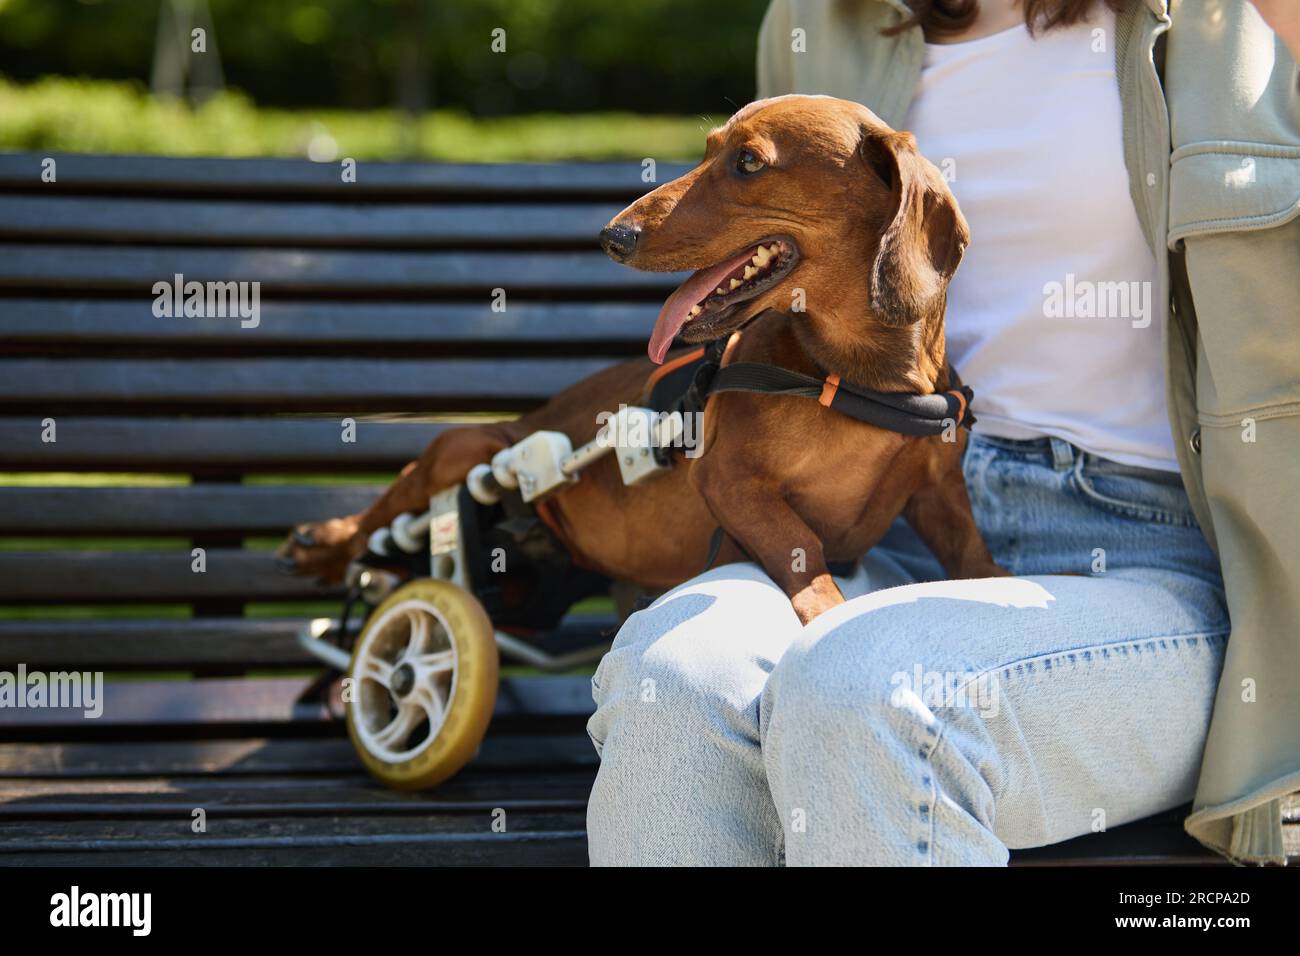 Disabled dachshund dog in a wheel chair sitting on a bench with the owner Stock Photo